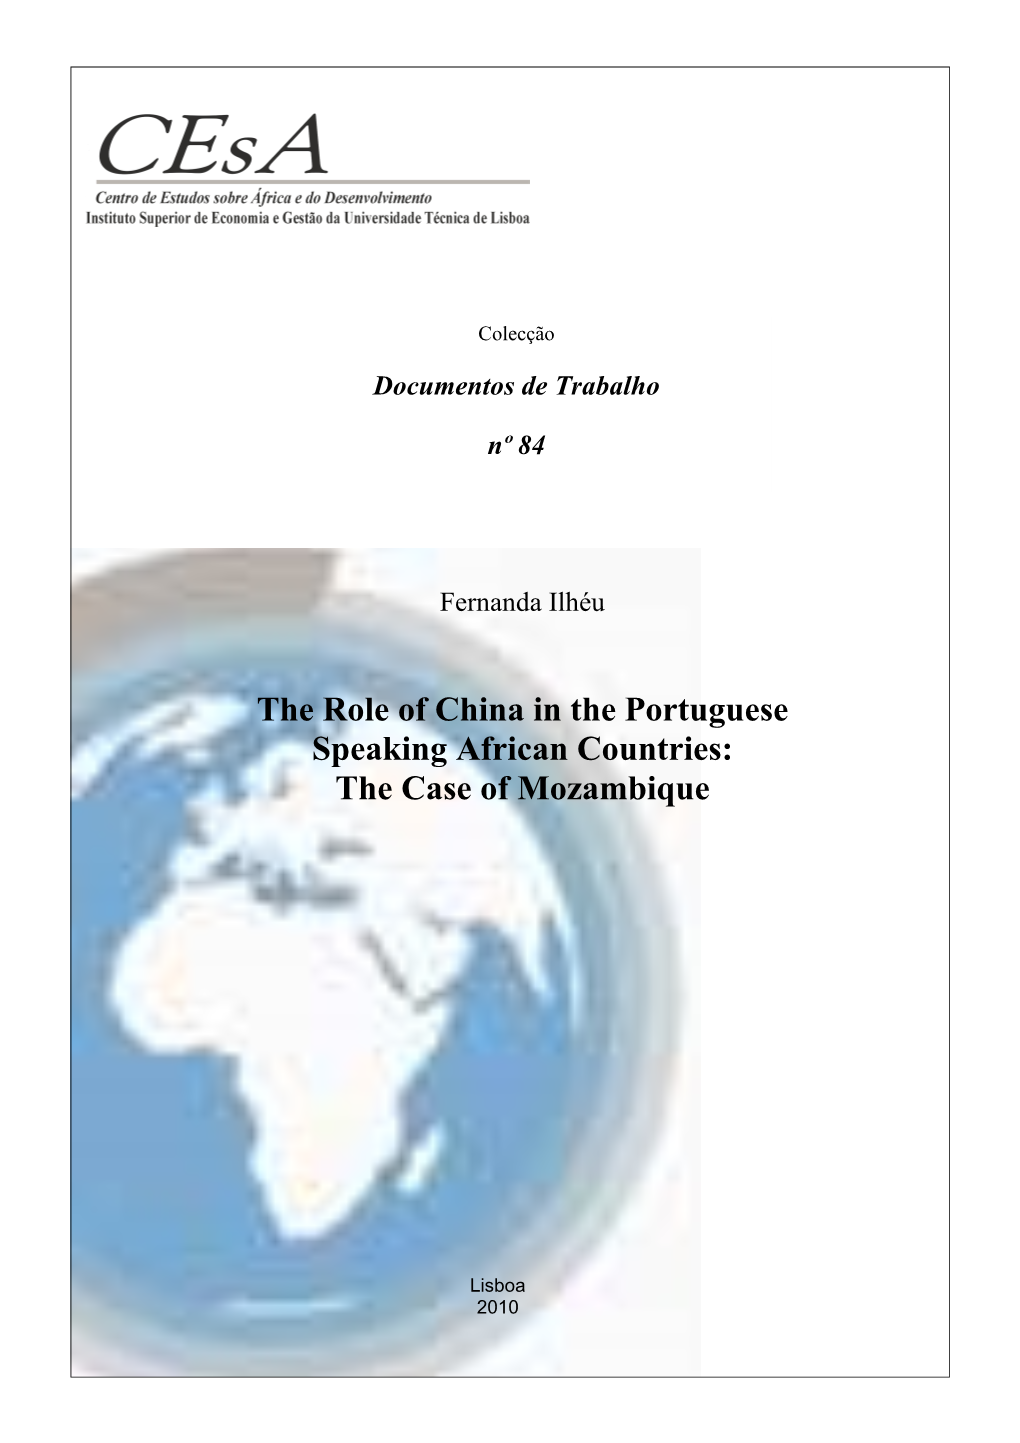 The Role of China in the Portuguese Speaking African Countries: the Case of Mozambique